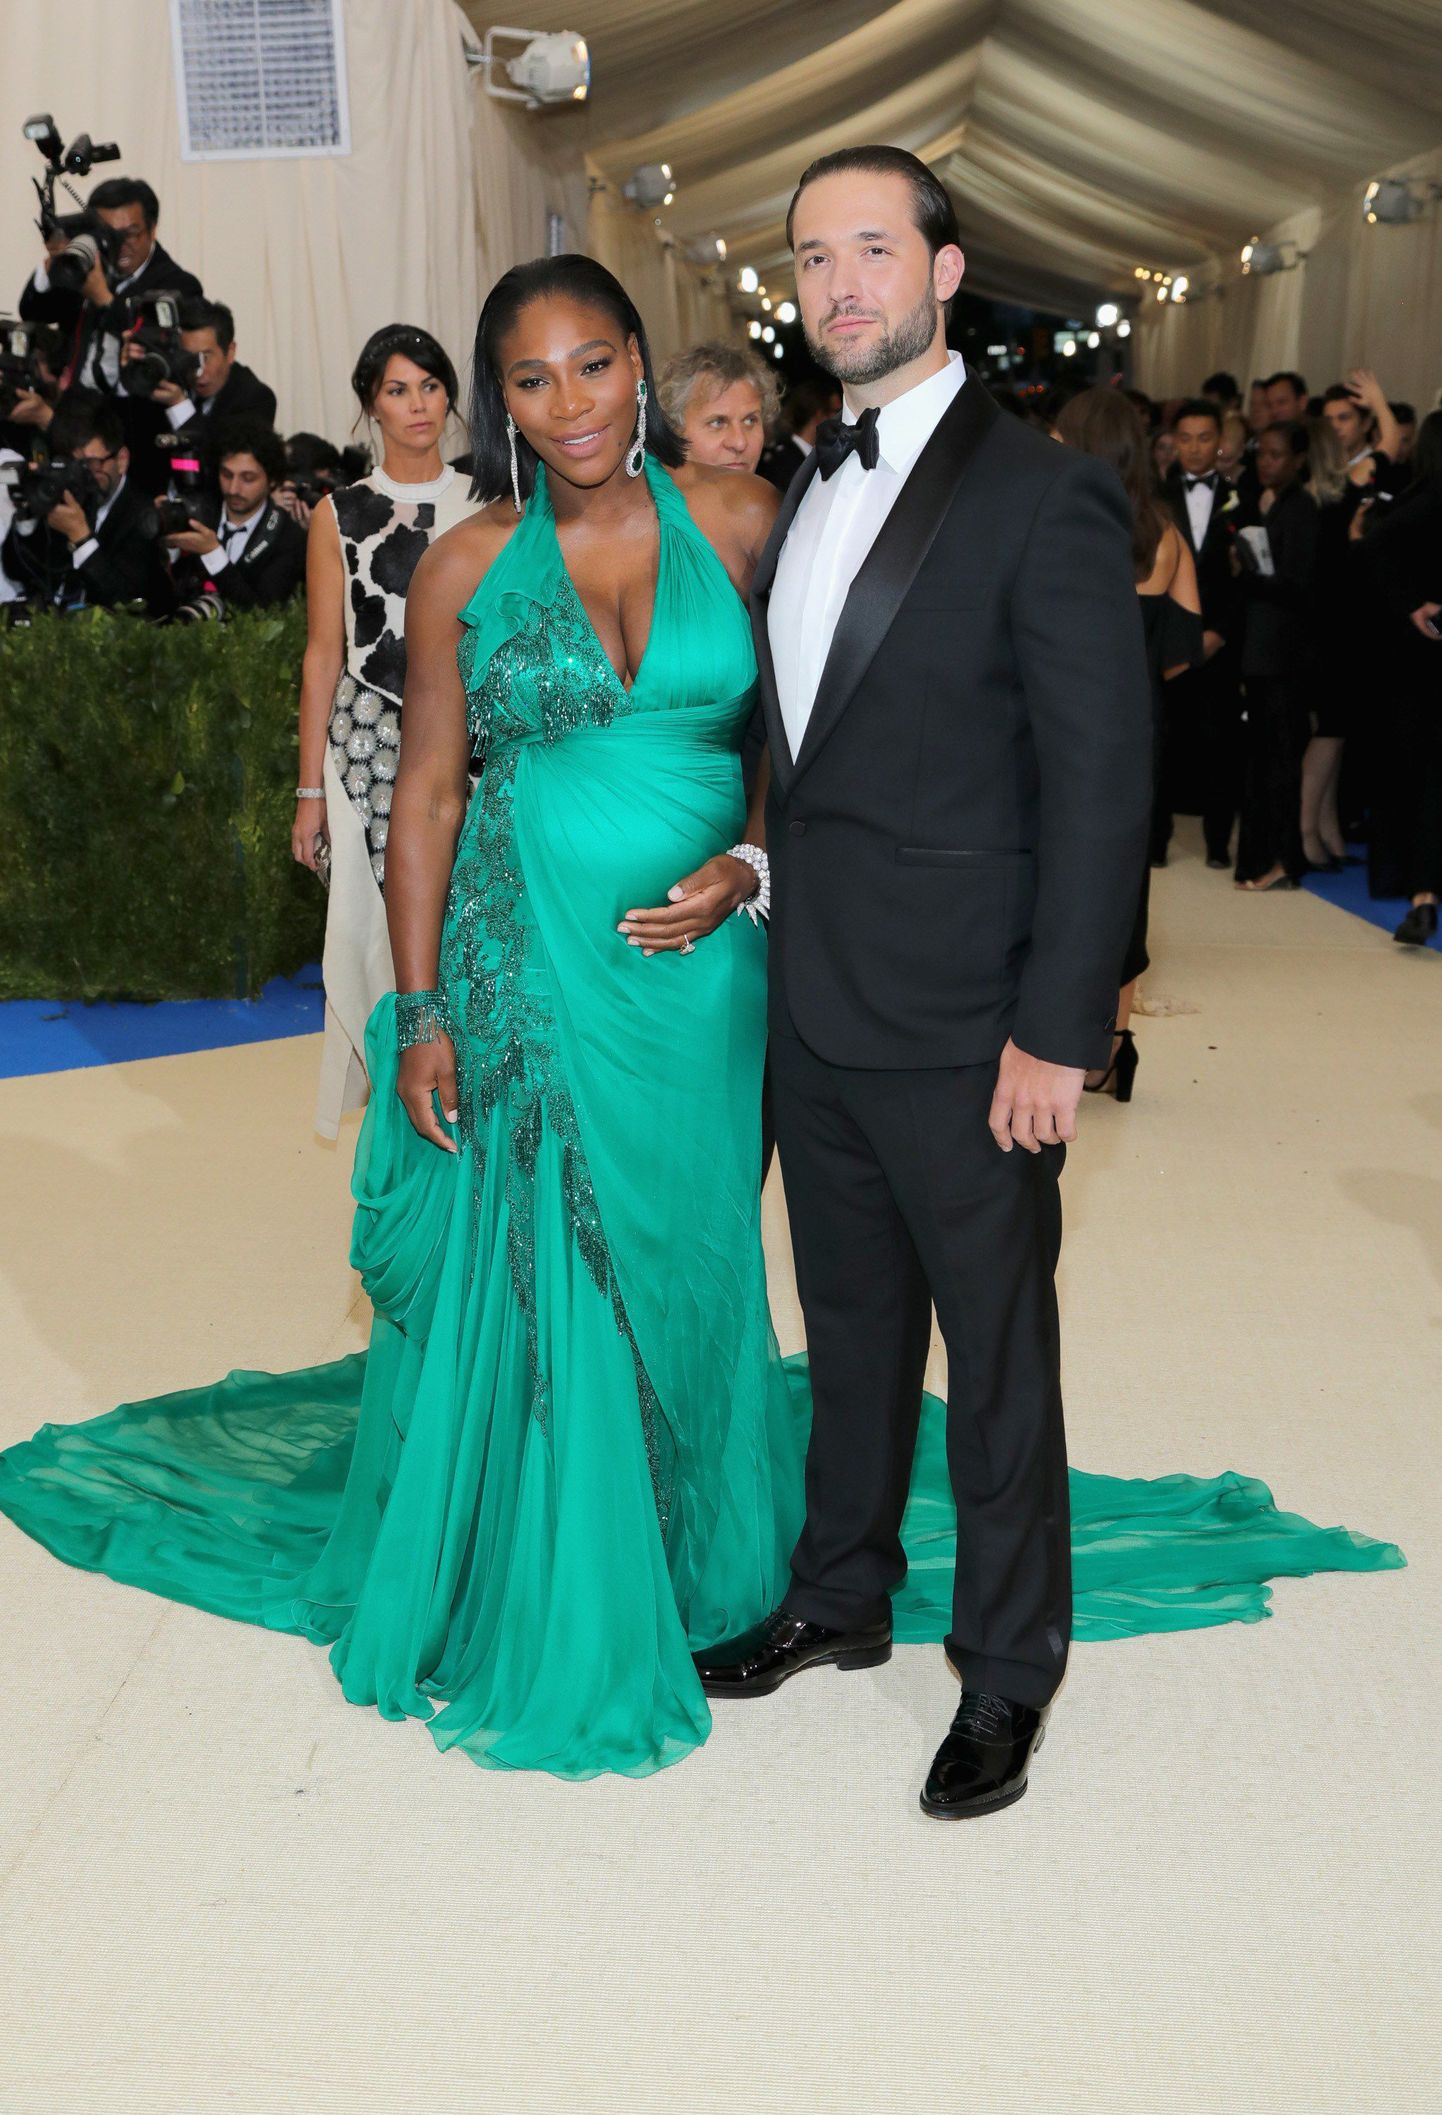 NEW YORK, NY - MAY 01: Serena Williams (L) and Alexis Ohanian attend the "Rei Kawakubo/Comme des Garcons: Art Of The In-Between" Costume Institute Gala at Metropolitan Museum of Art on May 1, 2017 in New York City.   Neilson Barnard/Getty Images/AFP